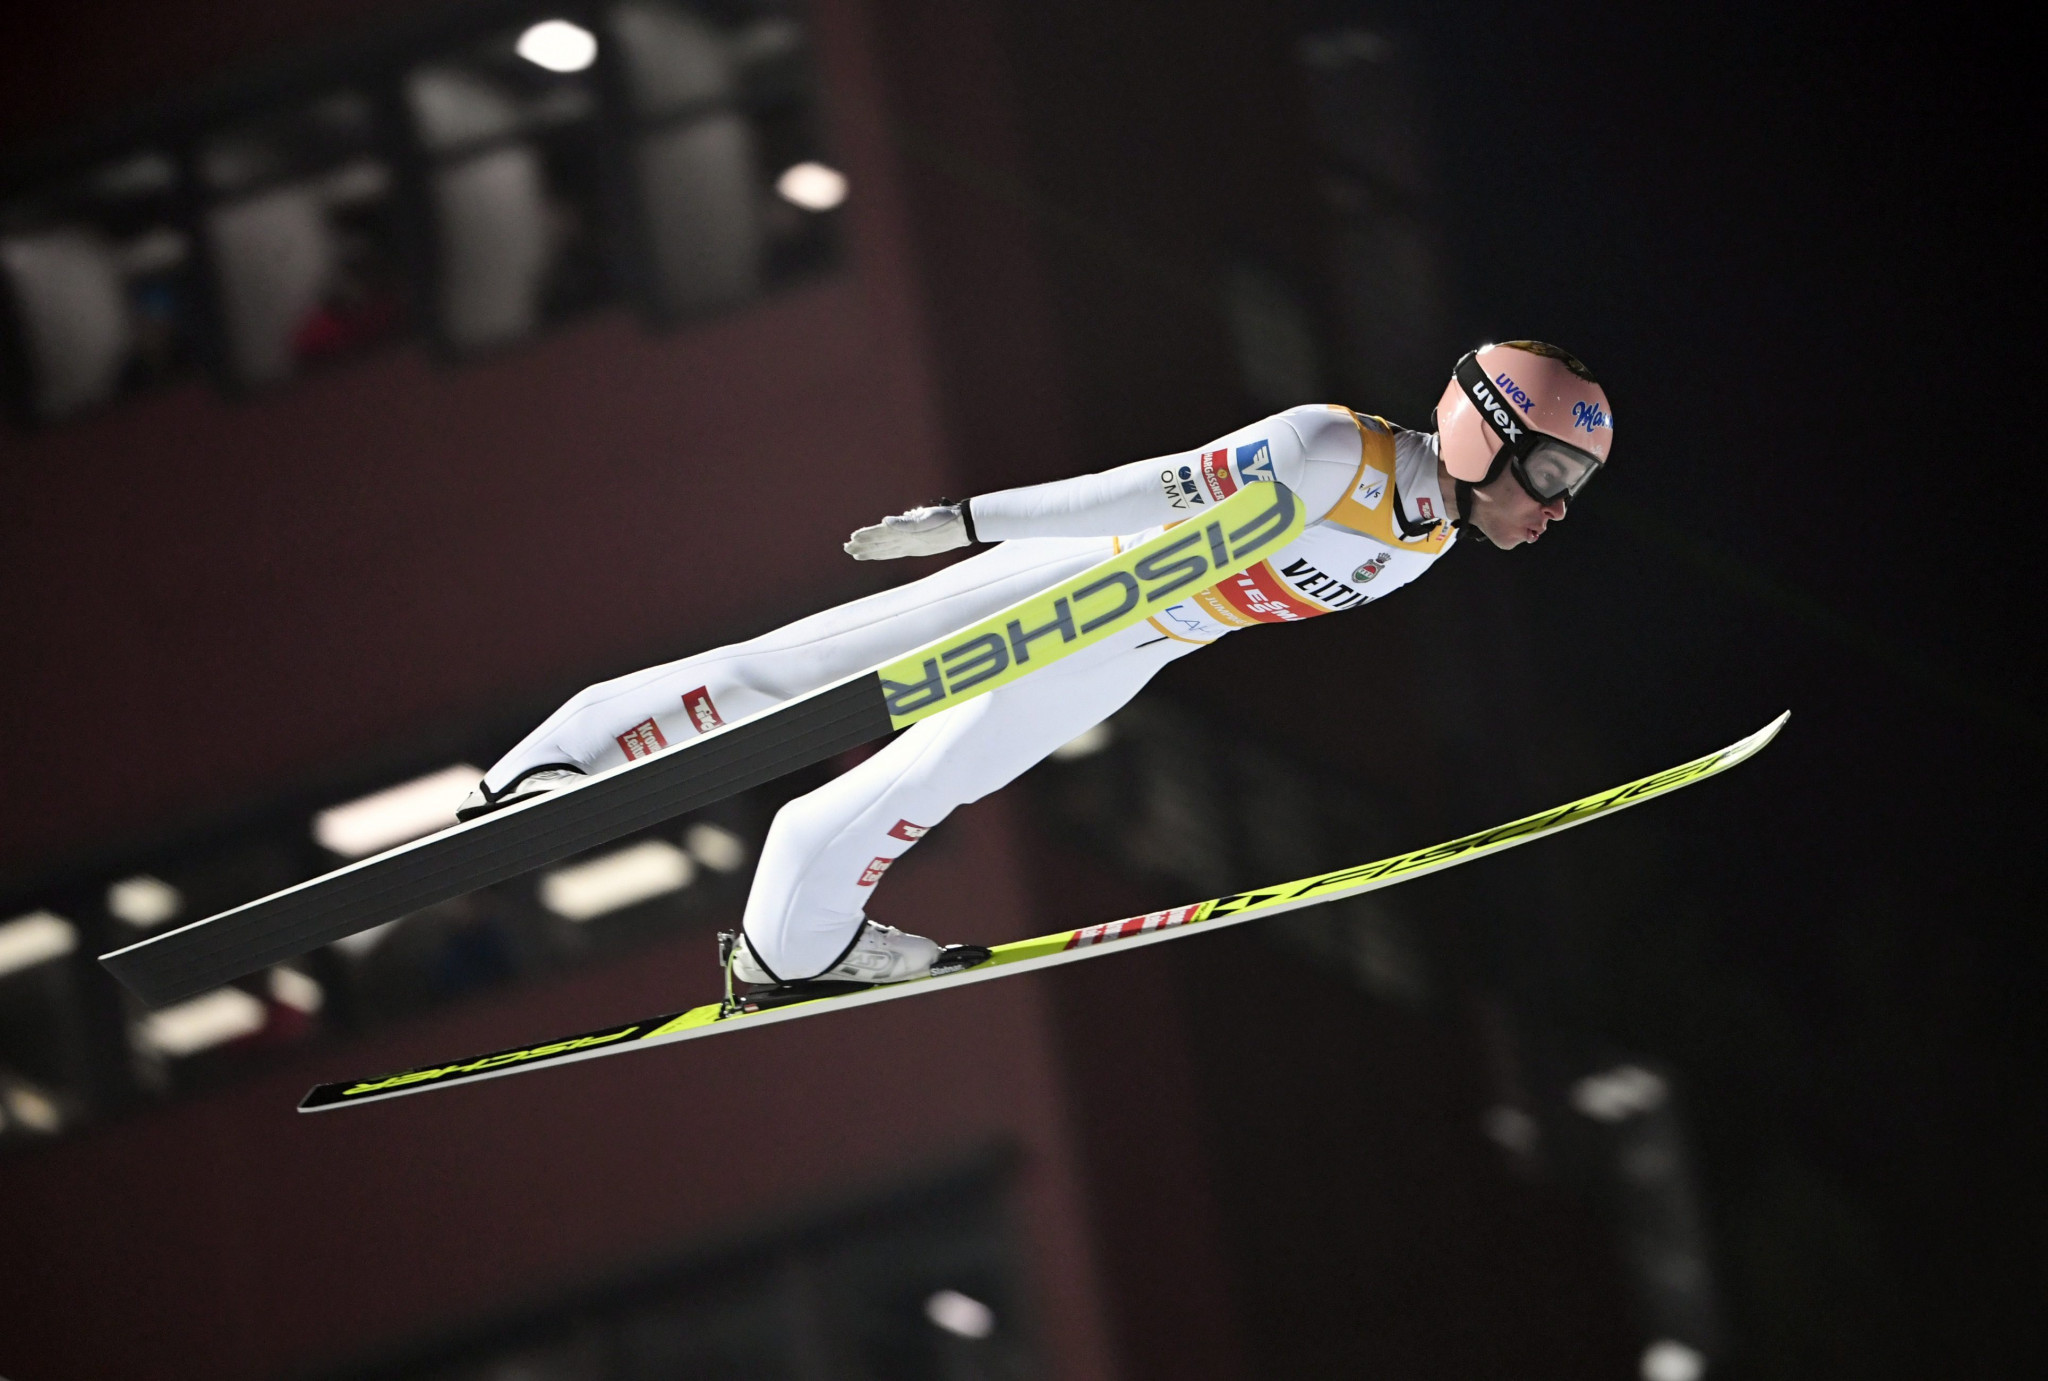 Stefan Kraft of Austria will be aiming to clinch the men's FIS Ski Jumping World Cup title at the Raw Air Tournament ©Getty Images